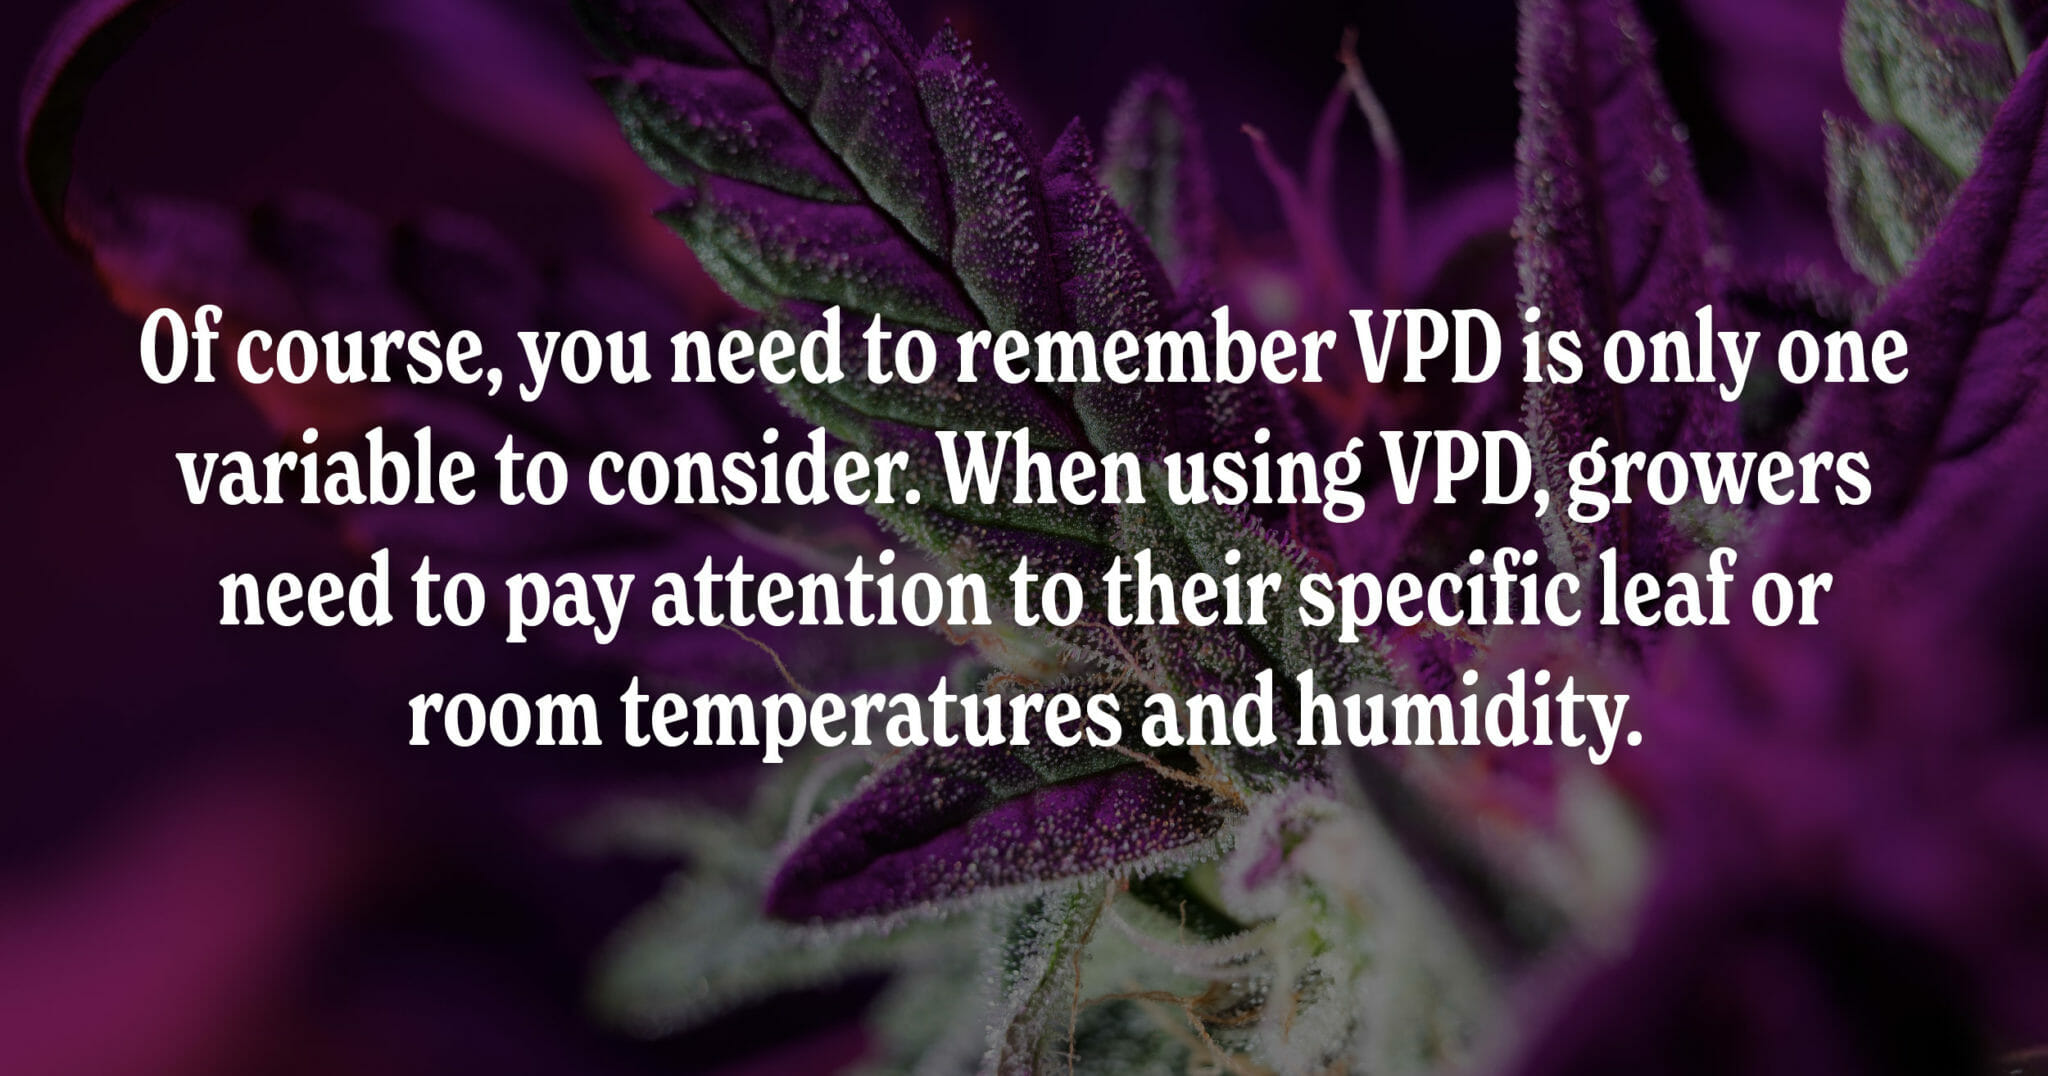 VPD is only one variable to consider. Also pay attention to specific leaf or room temperatures and humidity.